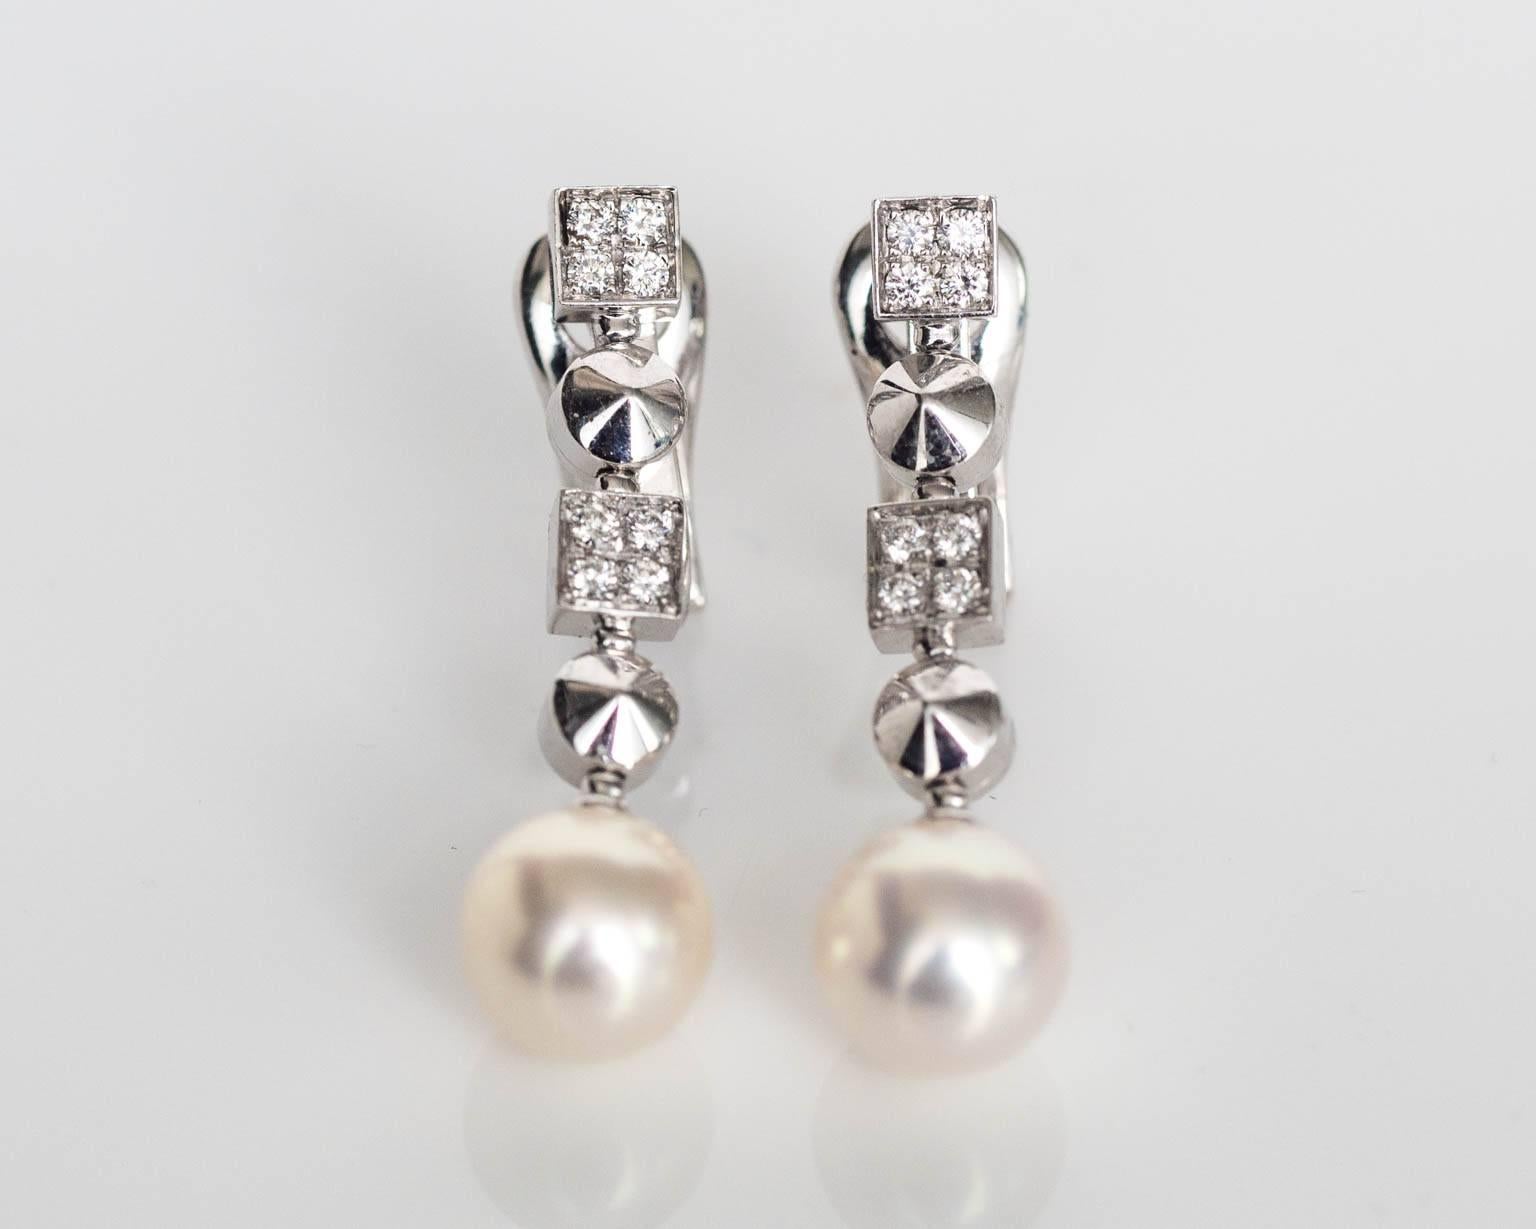 BVLGARI Earrings Lucea Design with .75cttw diamonds and 2 natural pearls

Item Details: 
Metal Type: 18K White Gold
Weight: 11.1 grams

Diamond Details:
Carat Weight: .75cttw

Natural Pearls (2)
